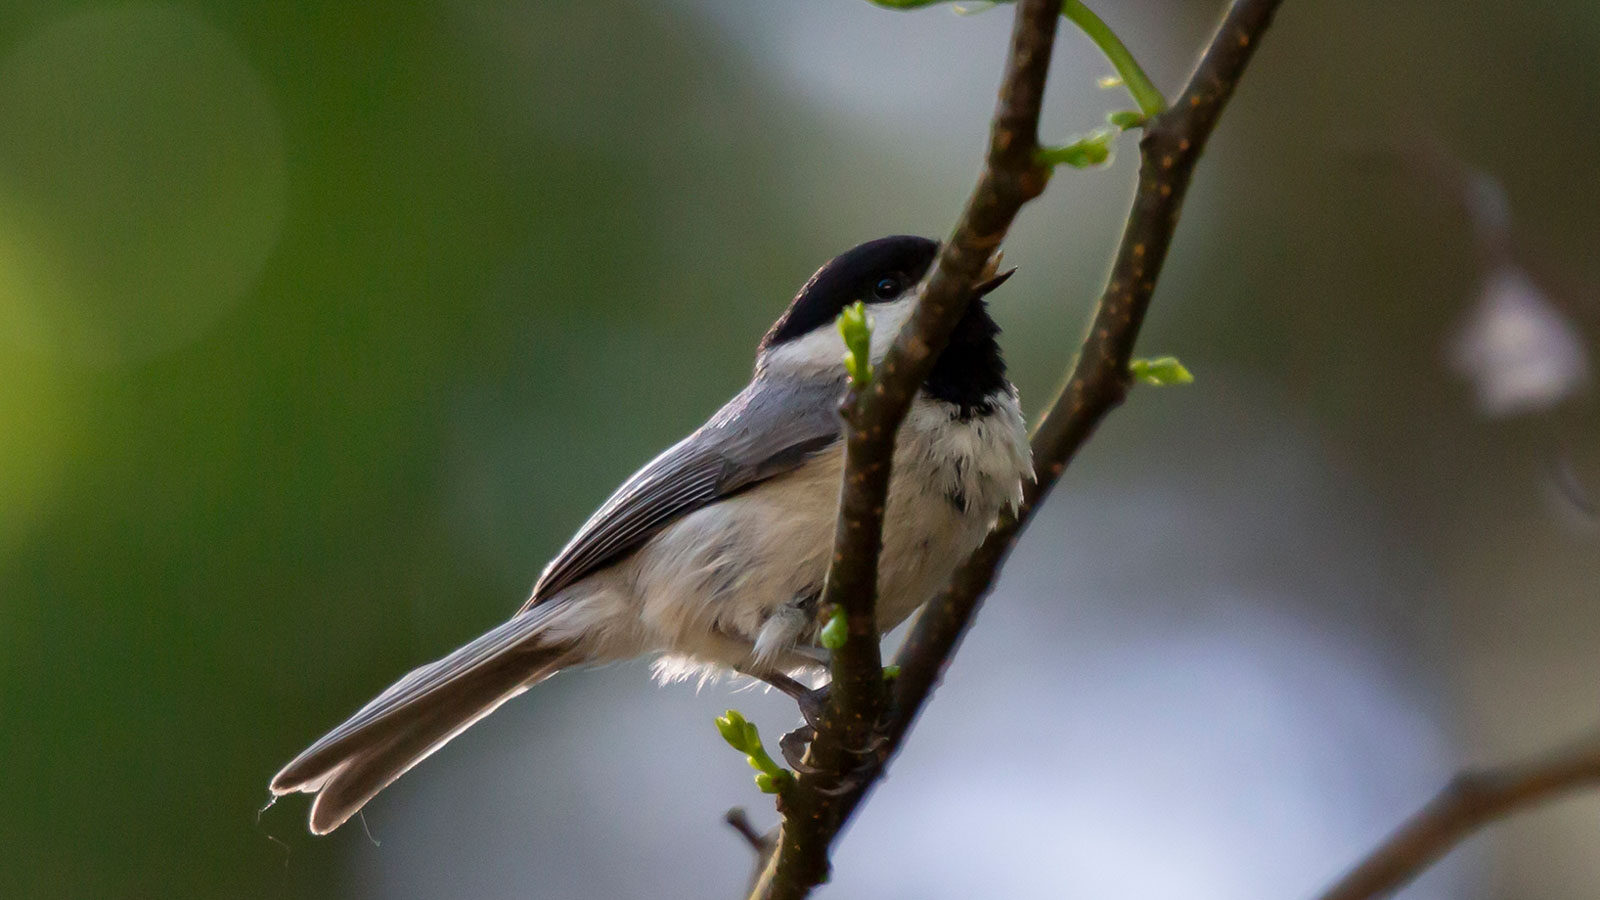 Carolina chickadee snacking on a seed from its perch on a bush branch